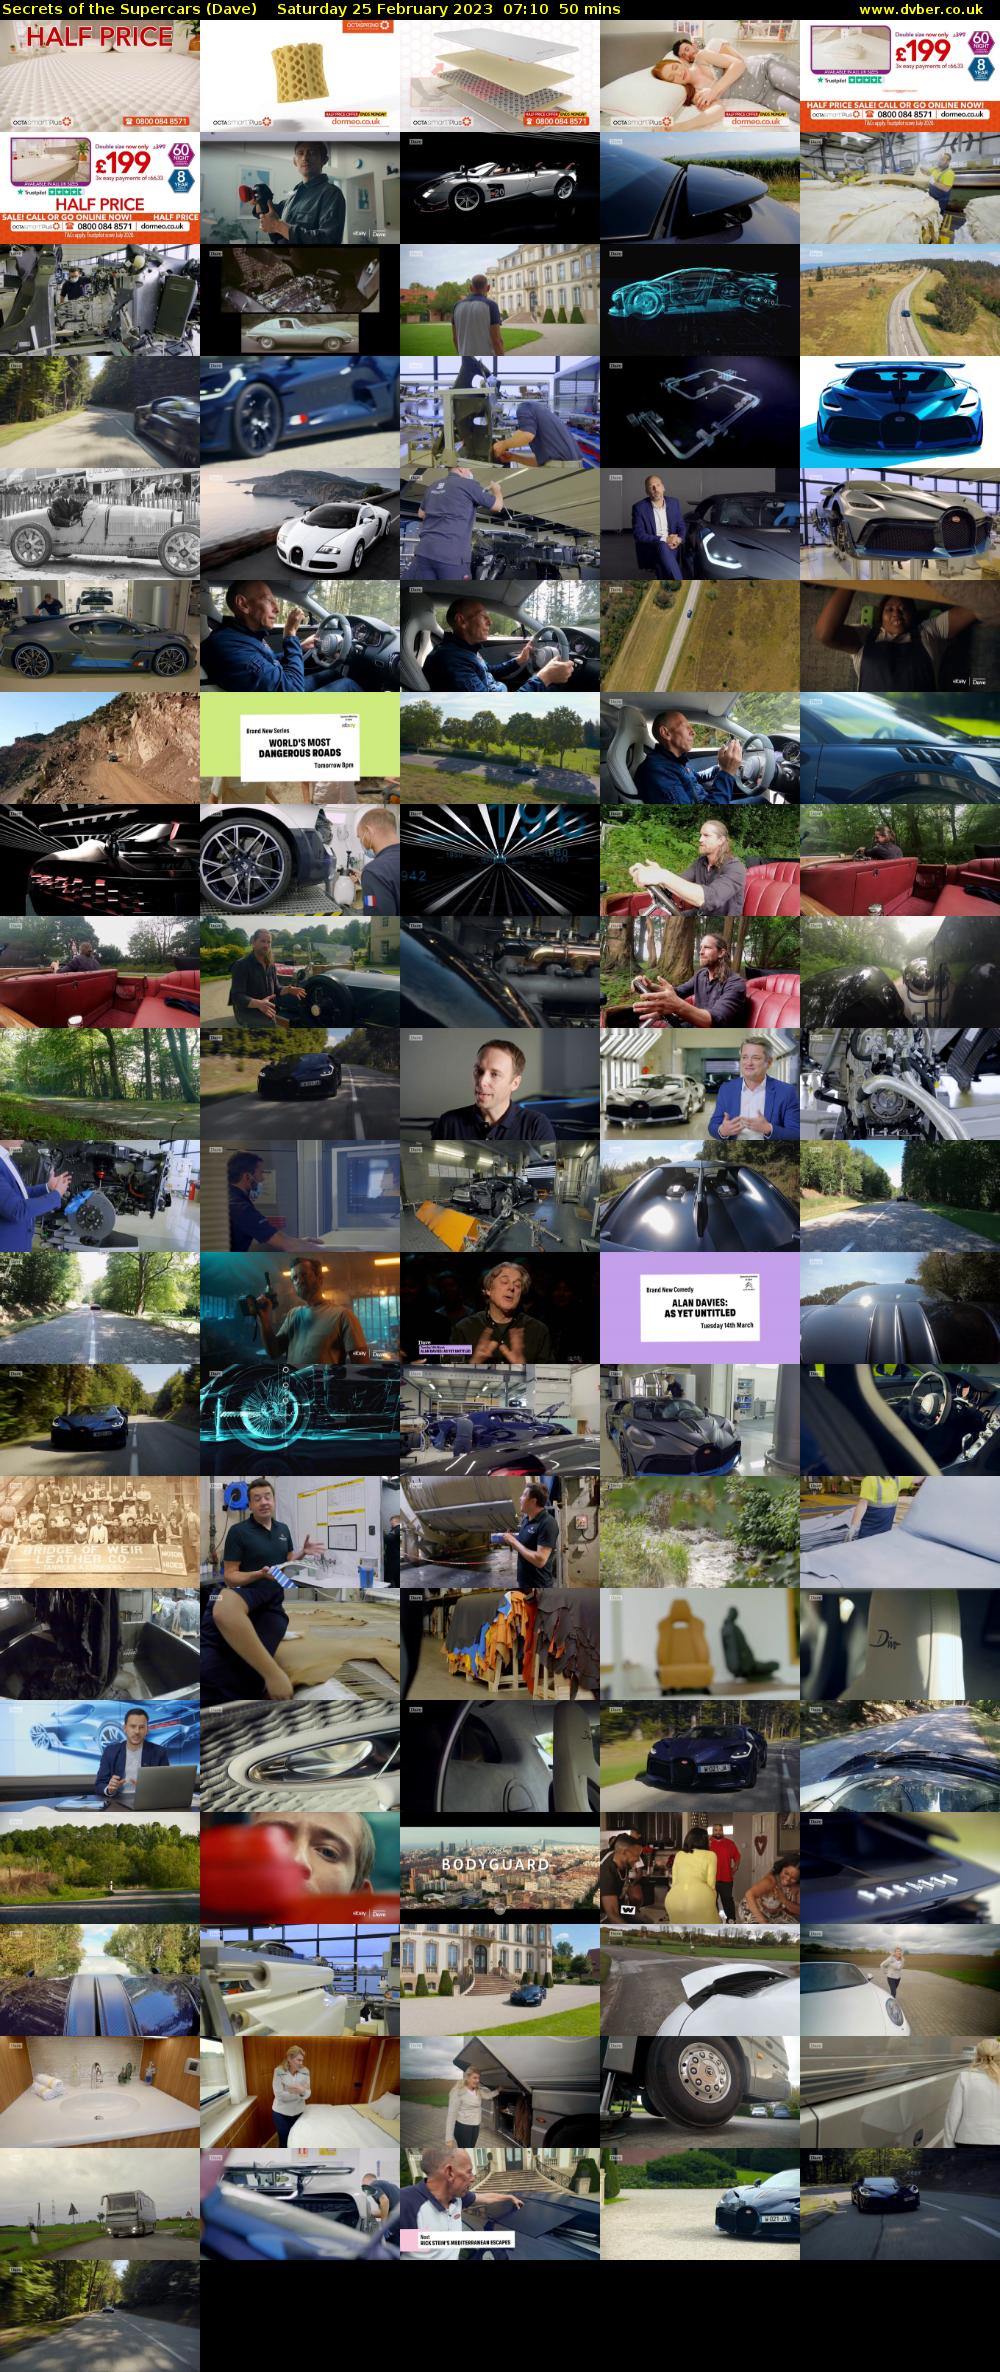 Secrets of the Supercars (Dave) Saturday 25 February 2023 07:10 - 08:00